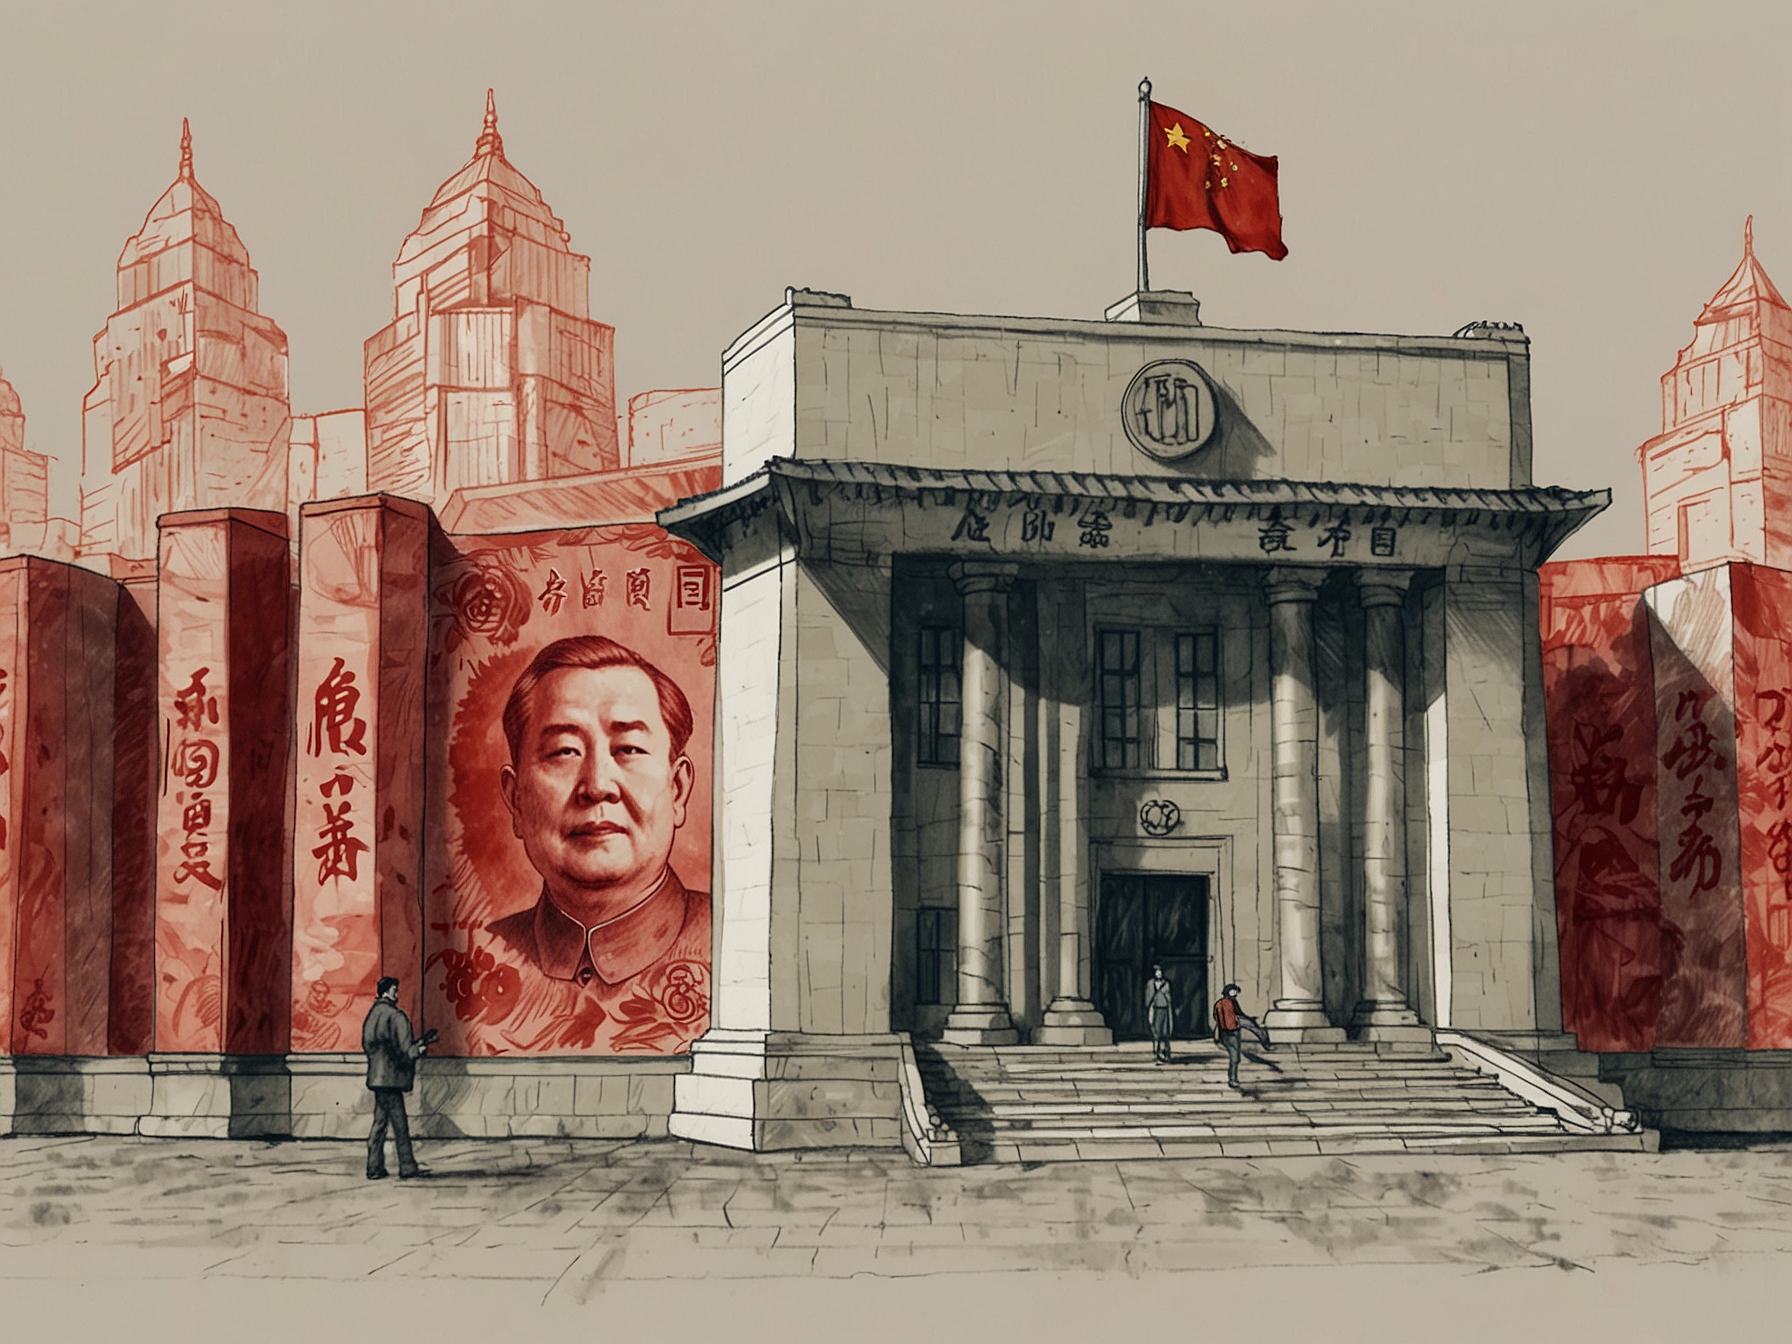 A depiction of the People's Bank of China, symbolizing potential monetary policy moves, such as cutting key lending rates, to stimulate the Chinese economy amid weak bank lending data.